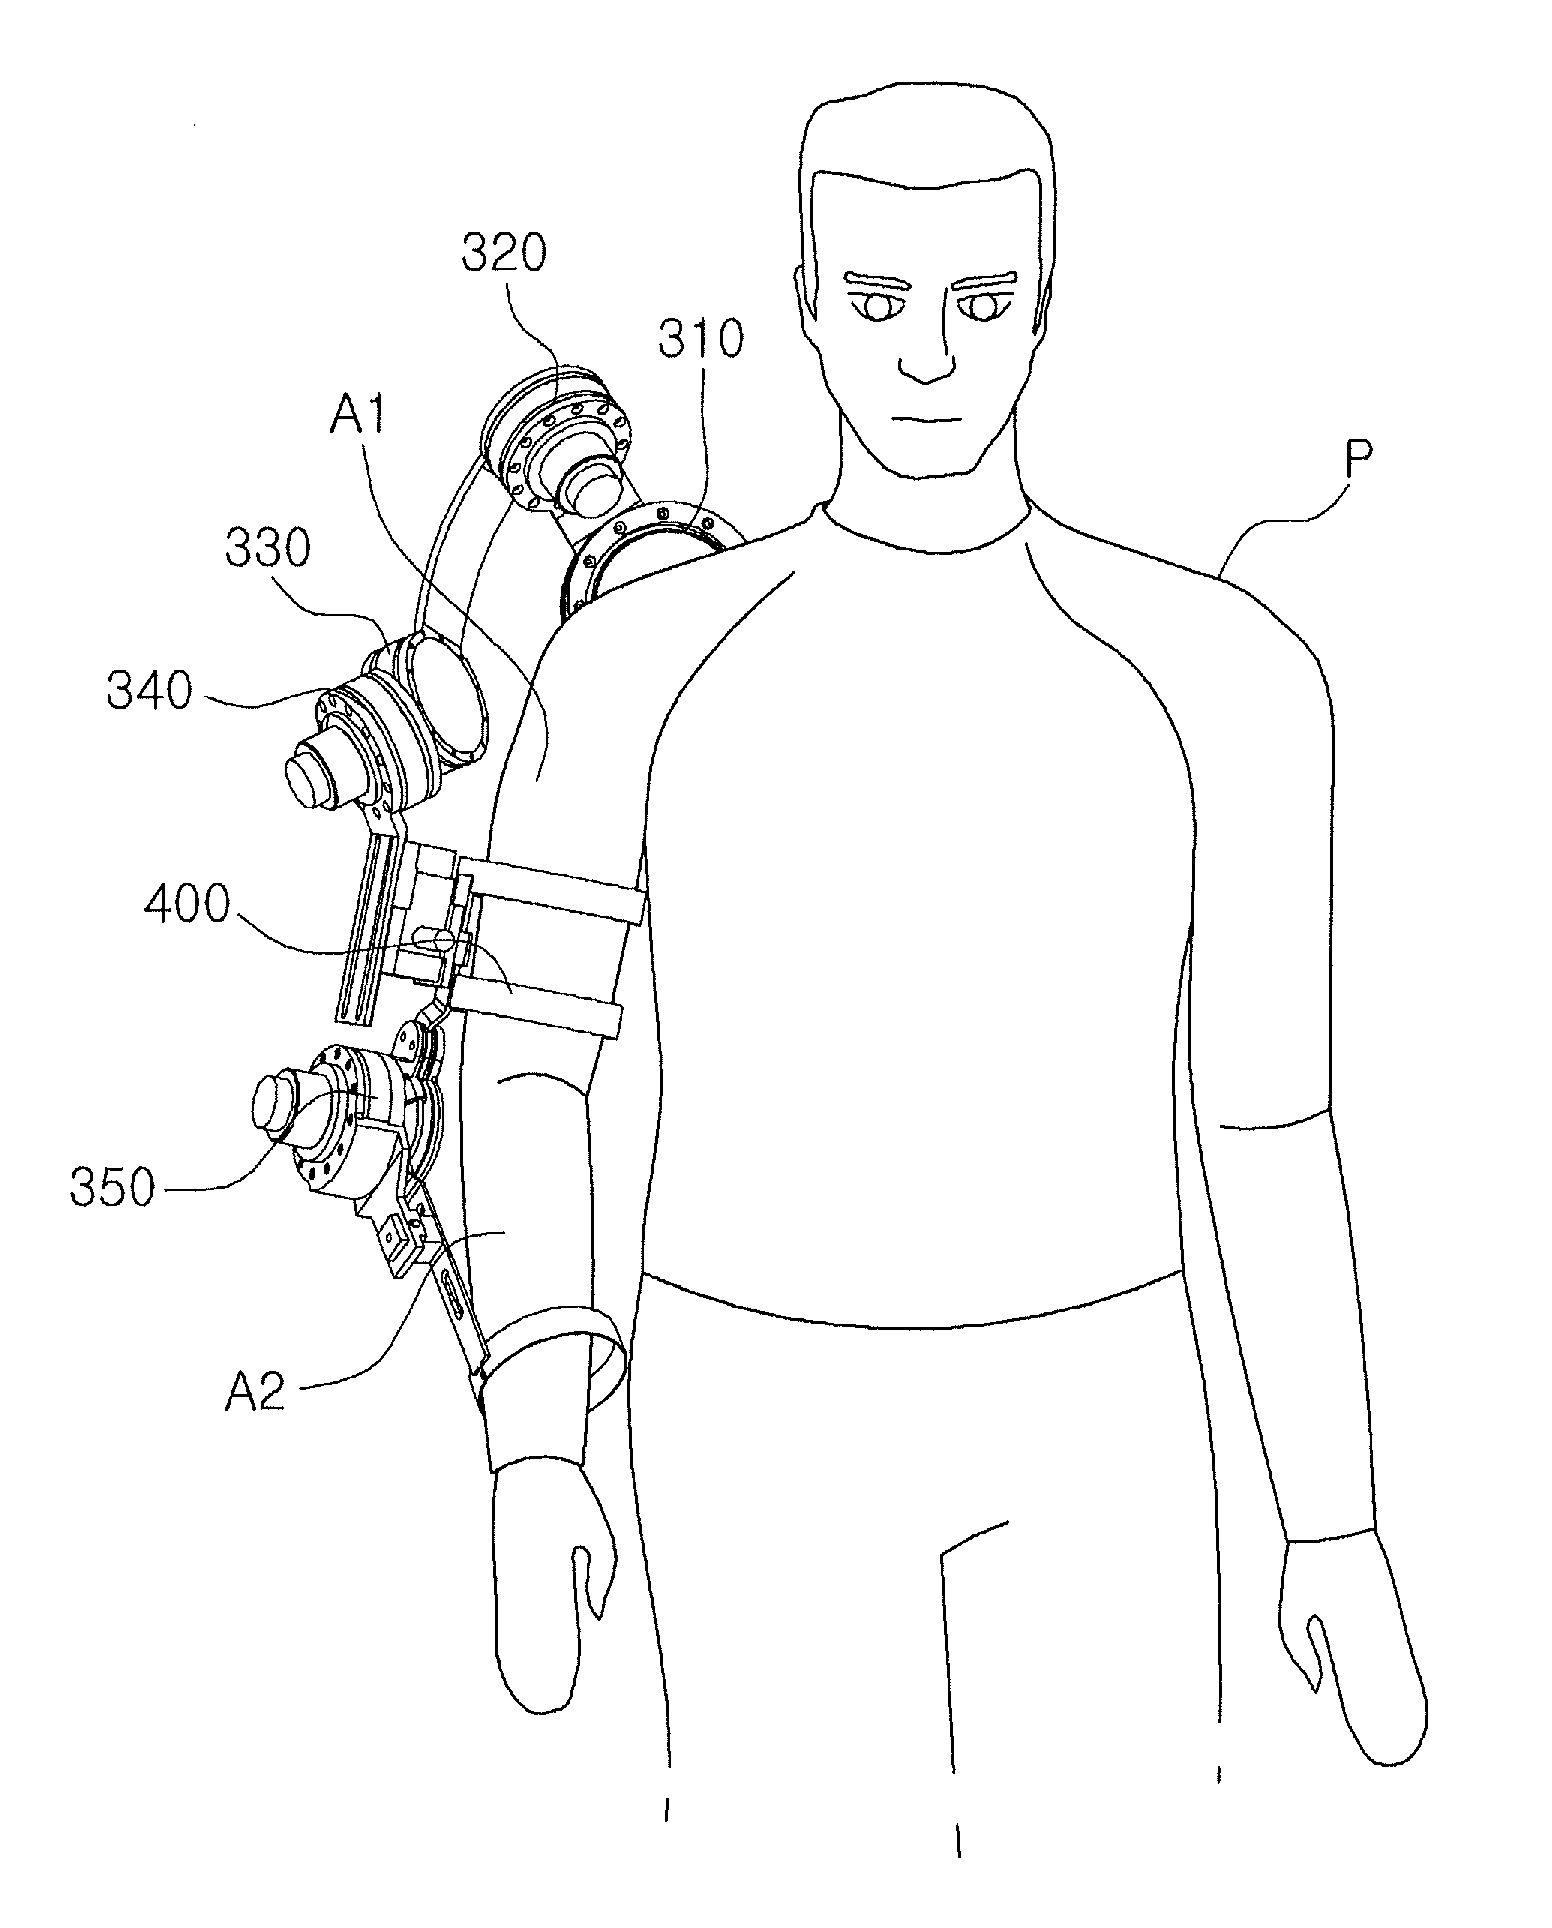 Wearable robotic system for rehabilitation training of the upper limbs